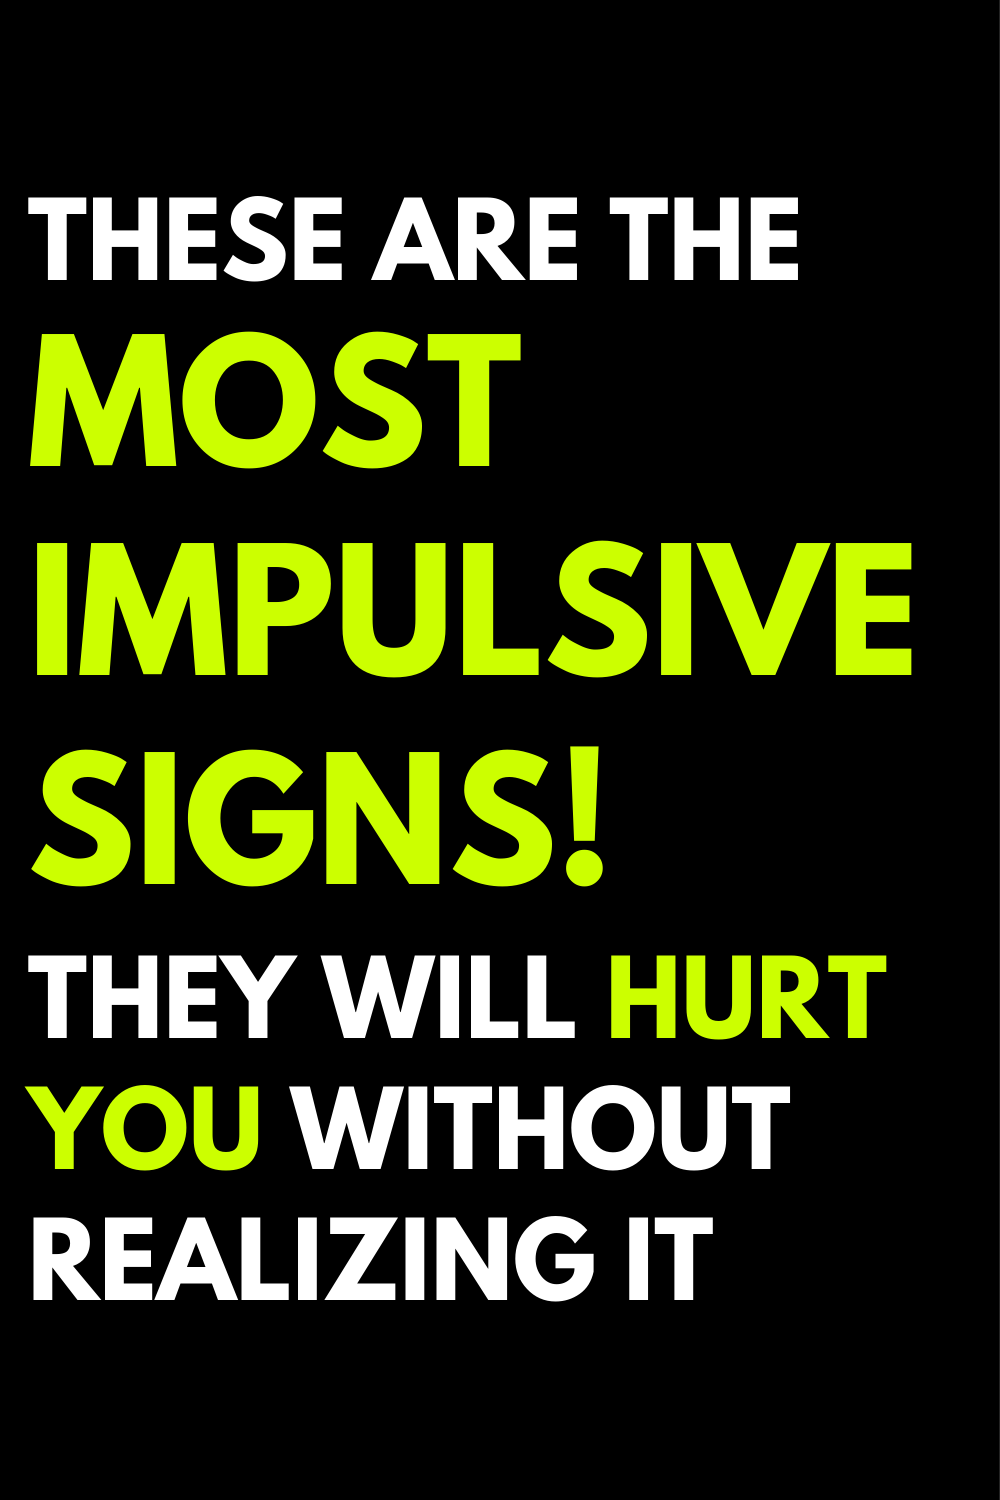 These are the most impulsive signs! They will hurt you without realizing it